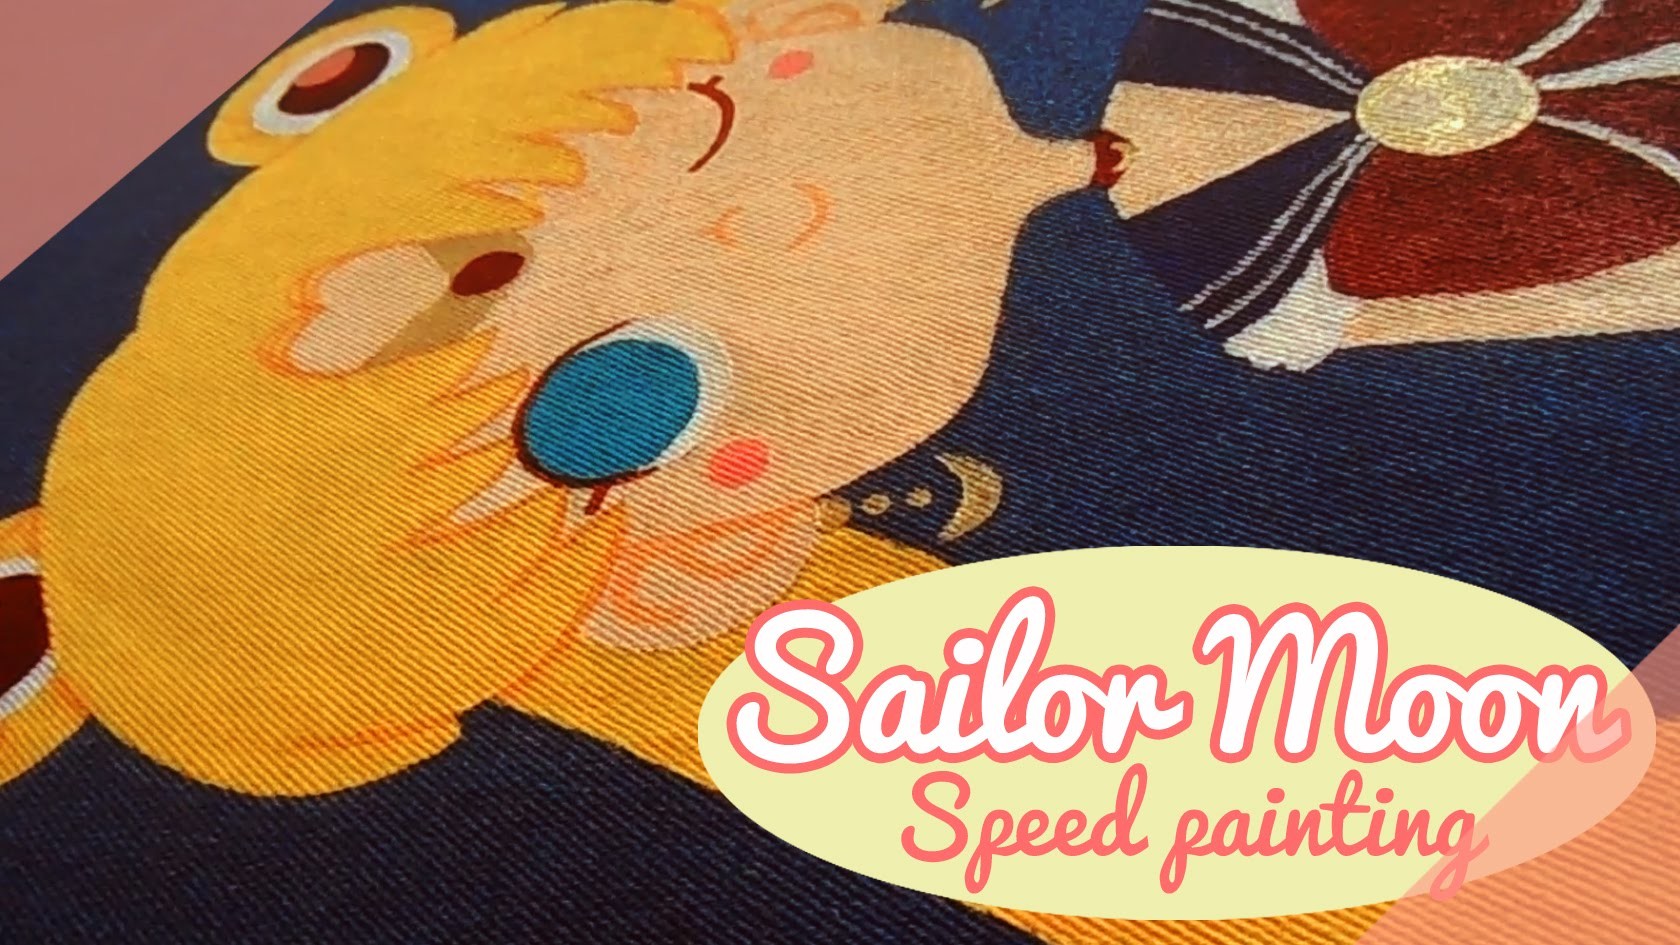 ♡ Sailor Moon ♡. Speed painting. Painting process By Piyoasdf